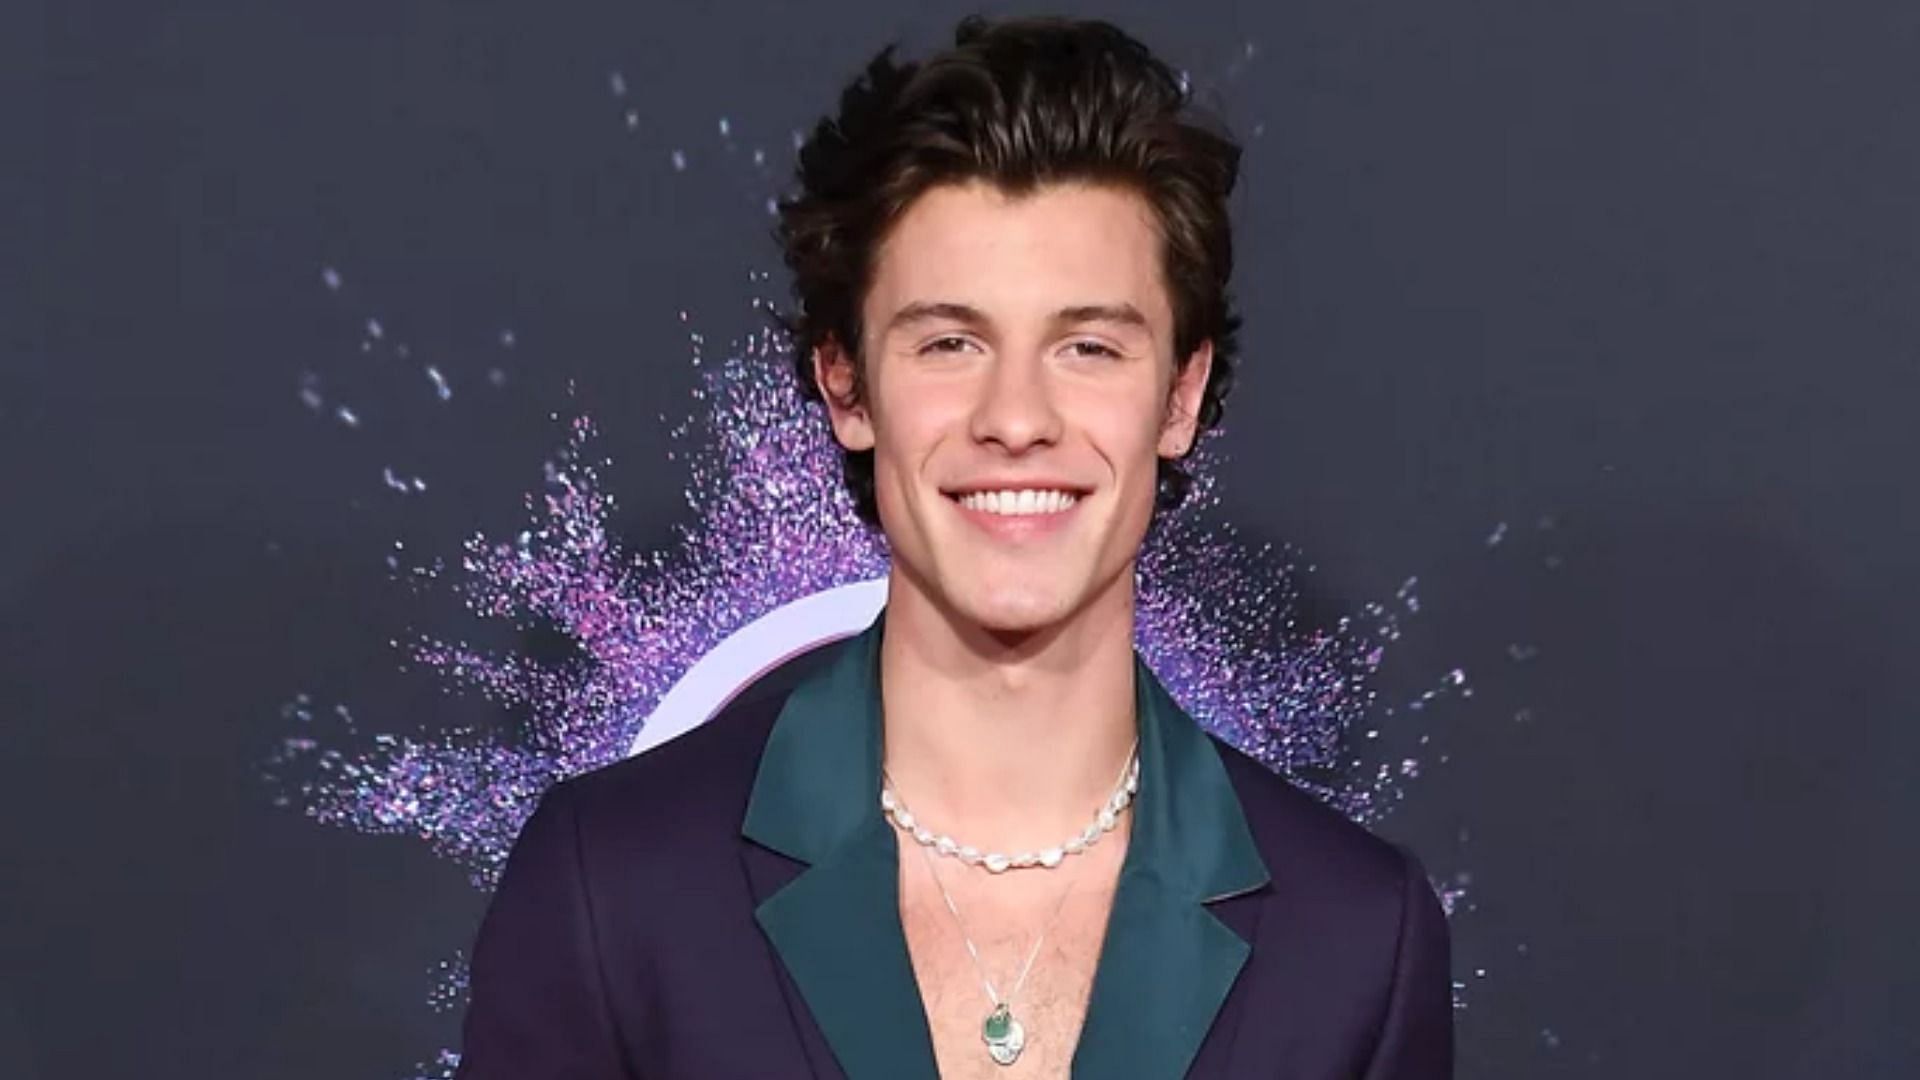 Shawn Mendes&#039; new single is inspired by his breakup with Camila Cabello (Image via Steve Granitz/Getty Images)